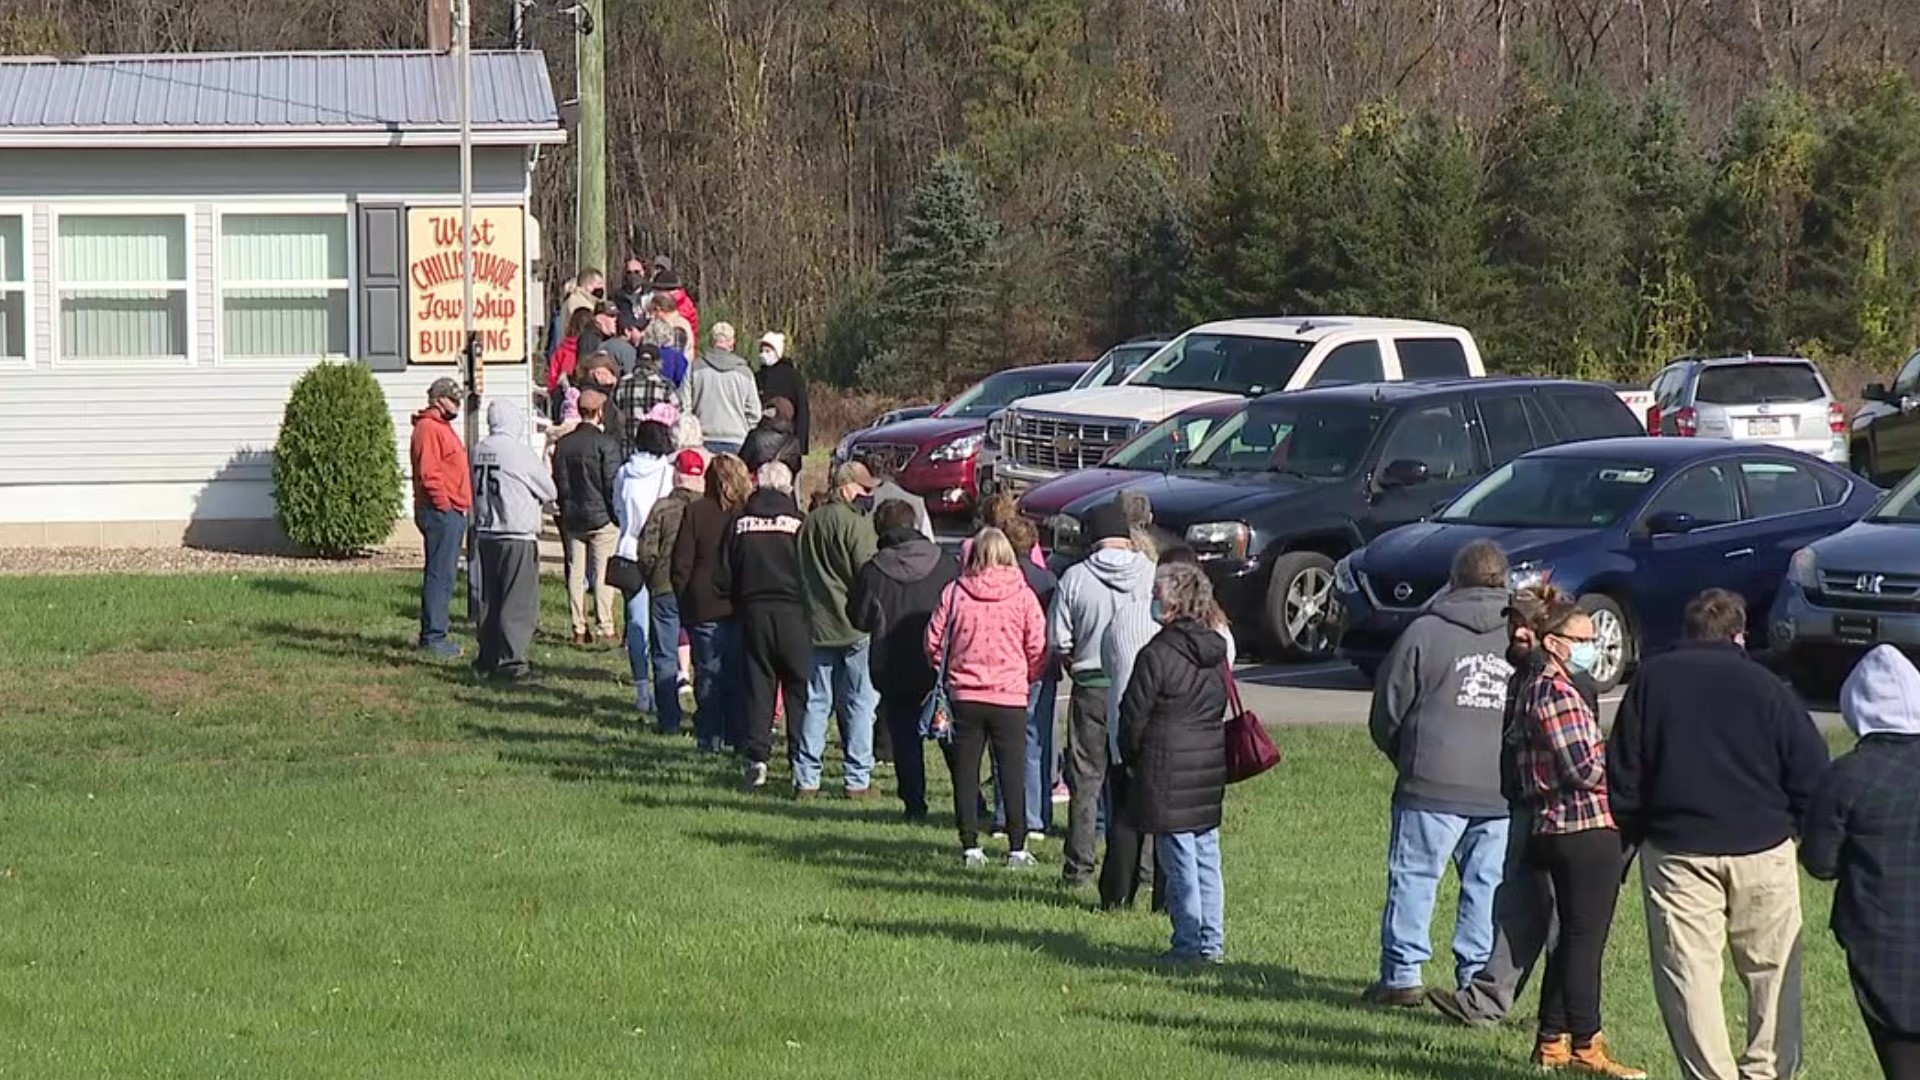 Some voters waited over an hour to cast their ballots in parts of Northumberland County.